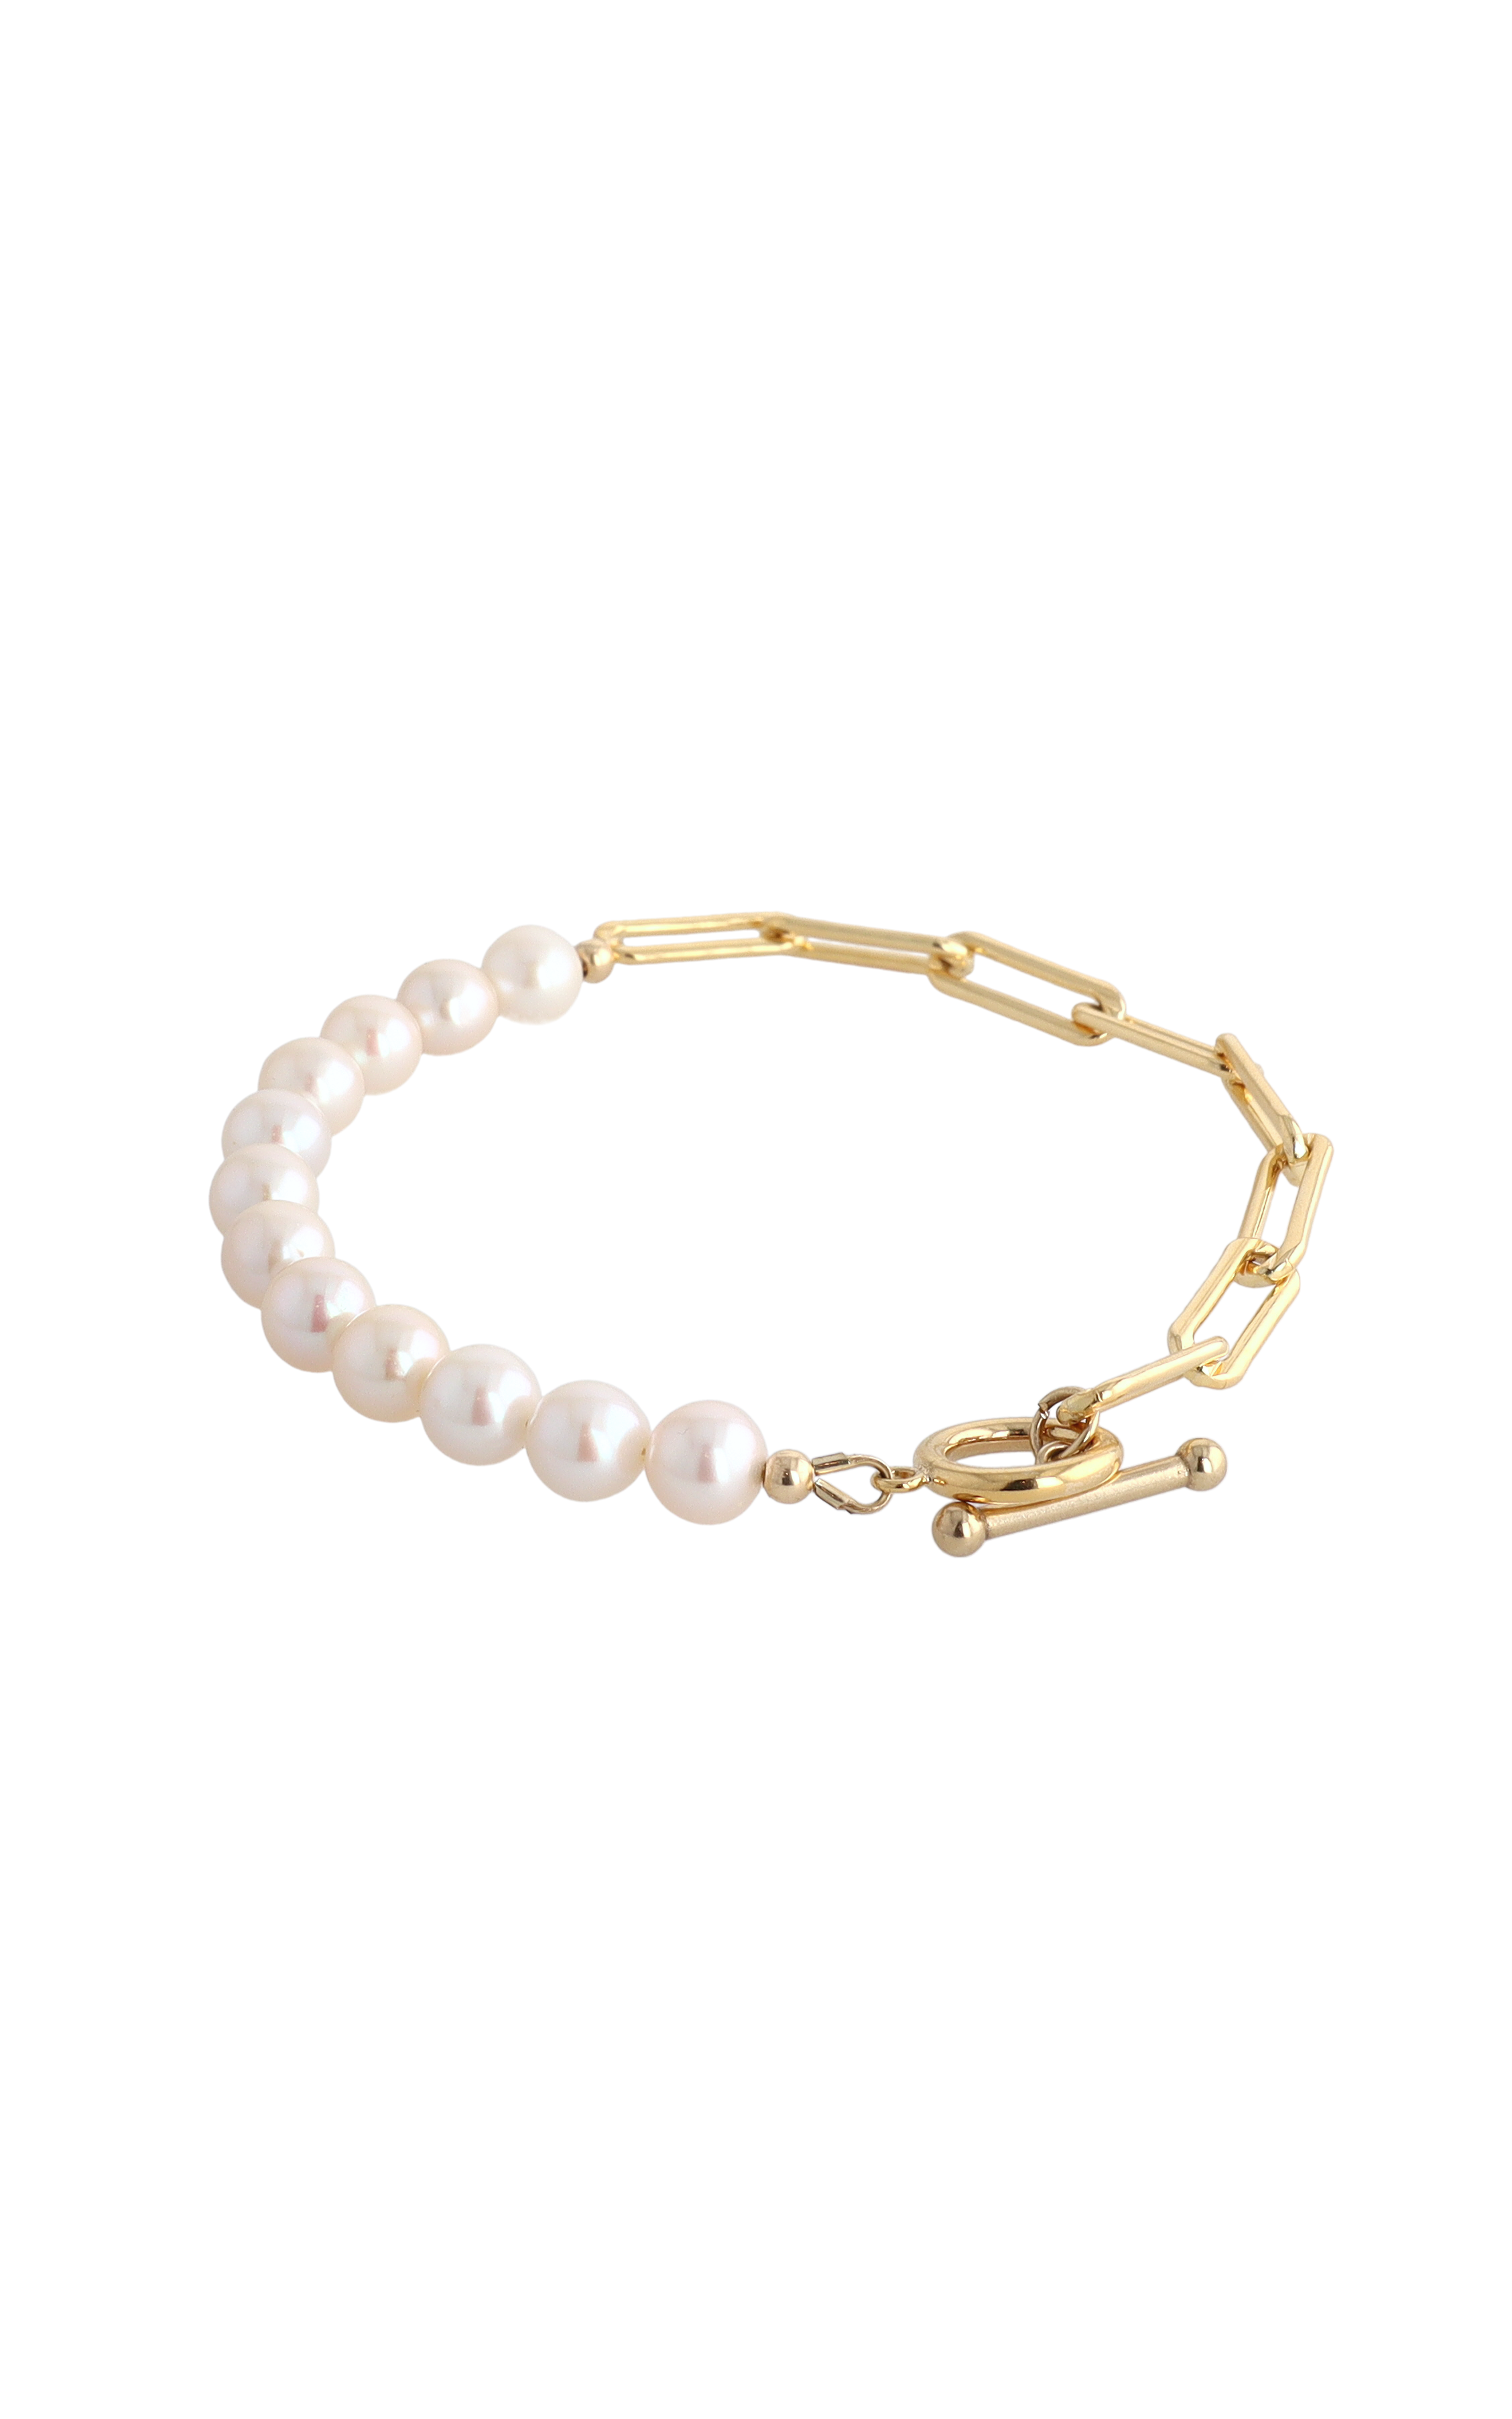 Goddess of Beauty Gold Vermeil Bracelet with Fresh Water Pearl